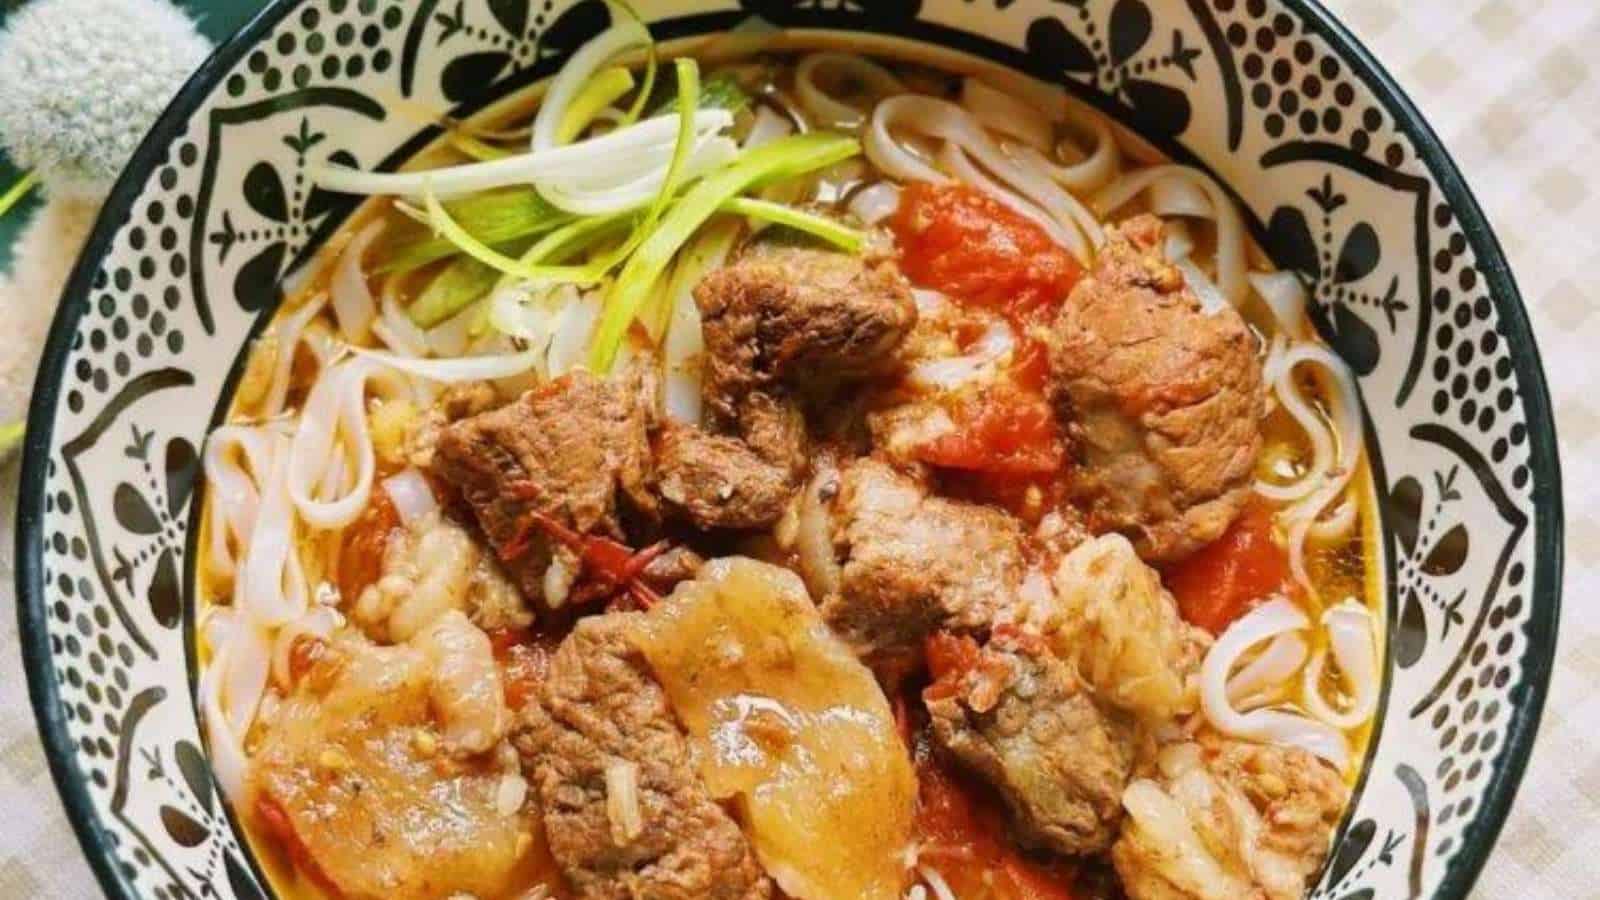 A bowl of noodles with meat and vegetables in it.